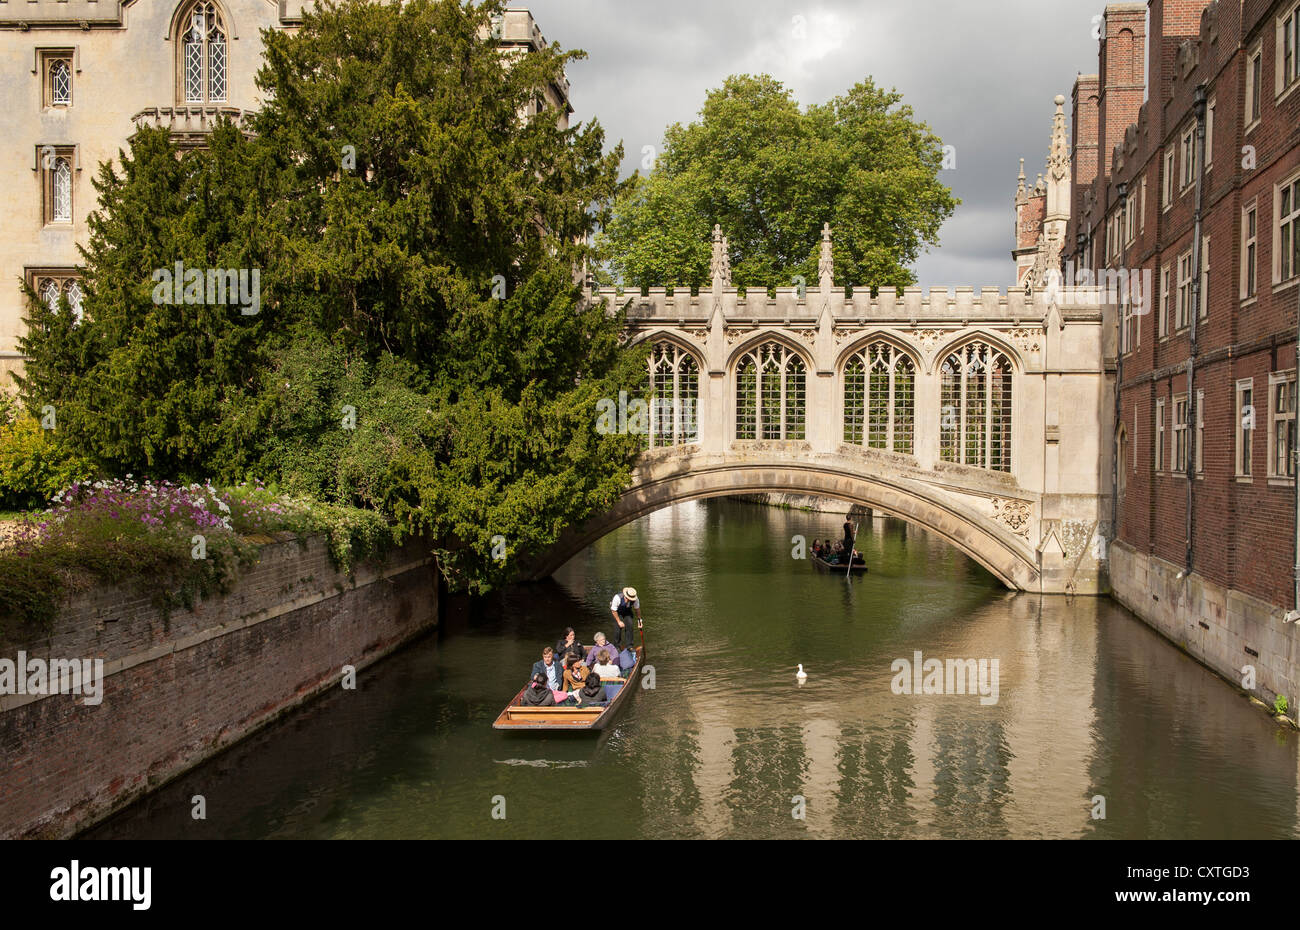 A punt moves along the river Cam, under the Bridge of Sighs by St John's College, Cambridge, England Stock Photo